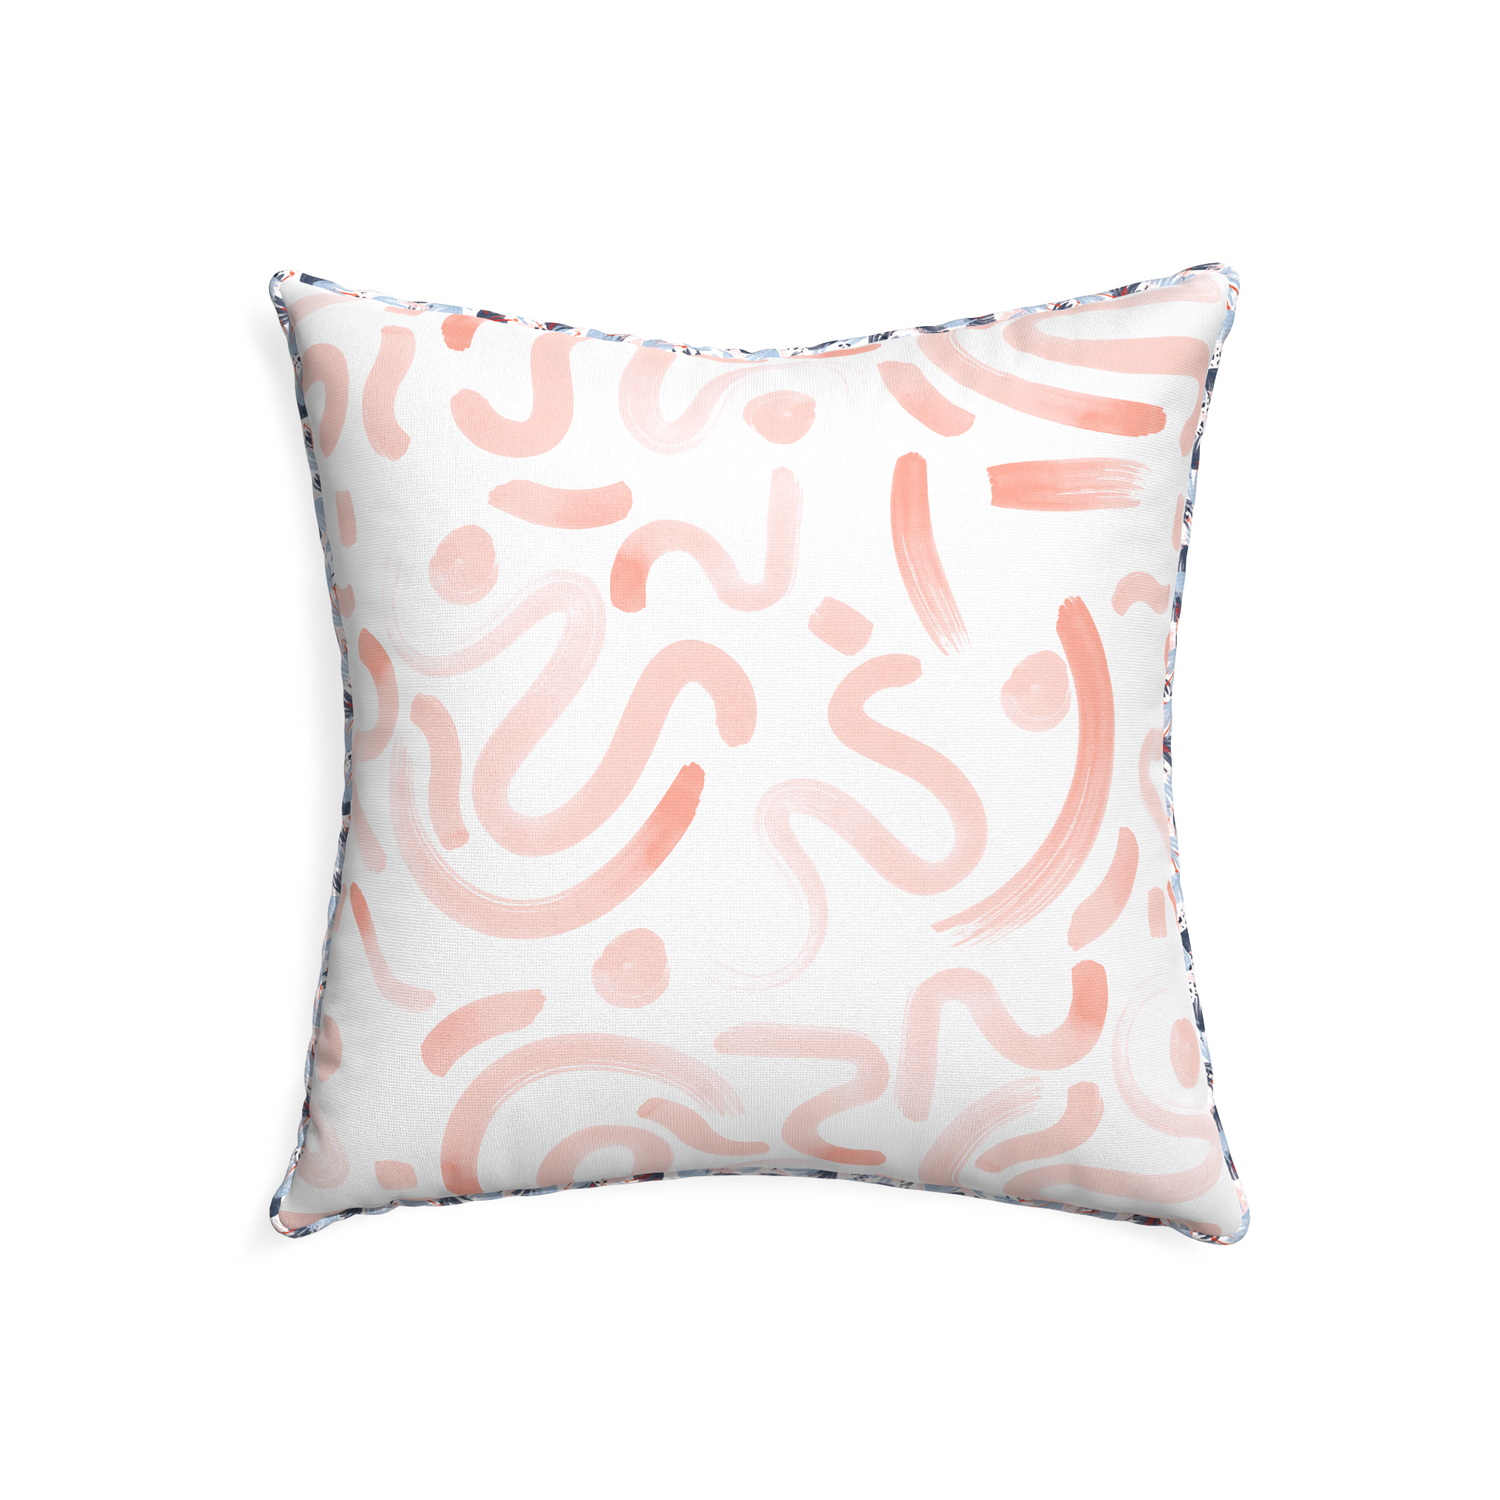 22-square hockney pink custom pink graphicpillow with e piping on white background